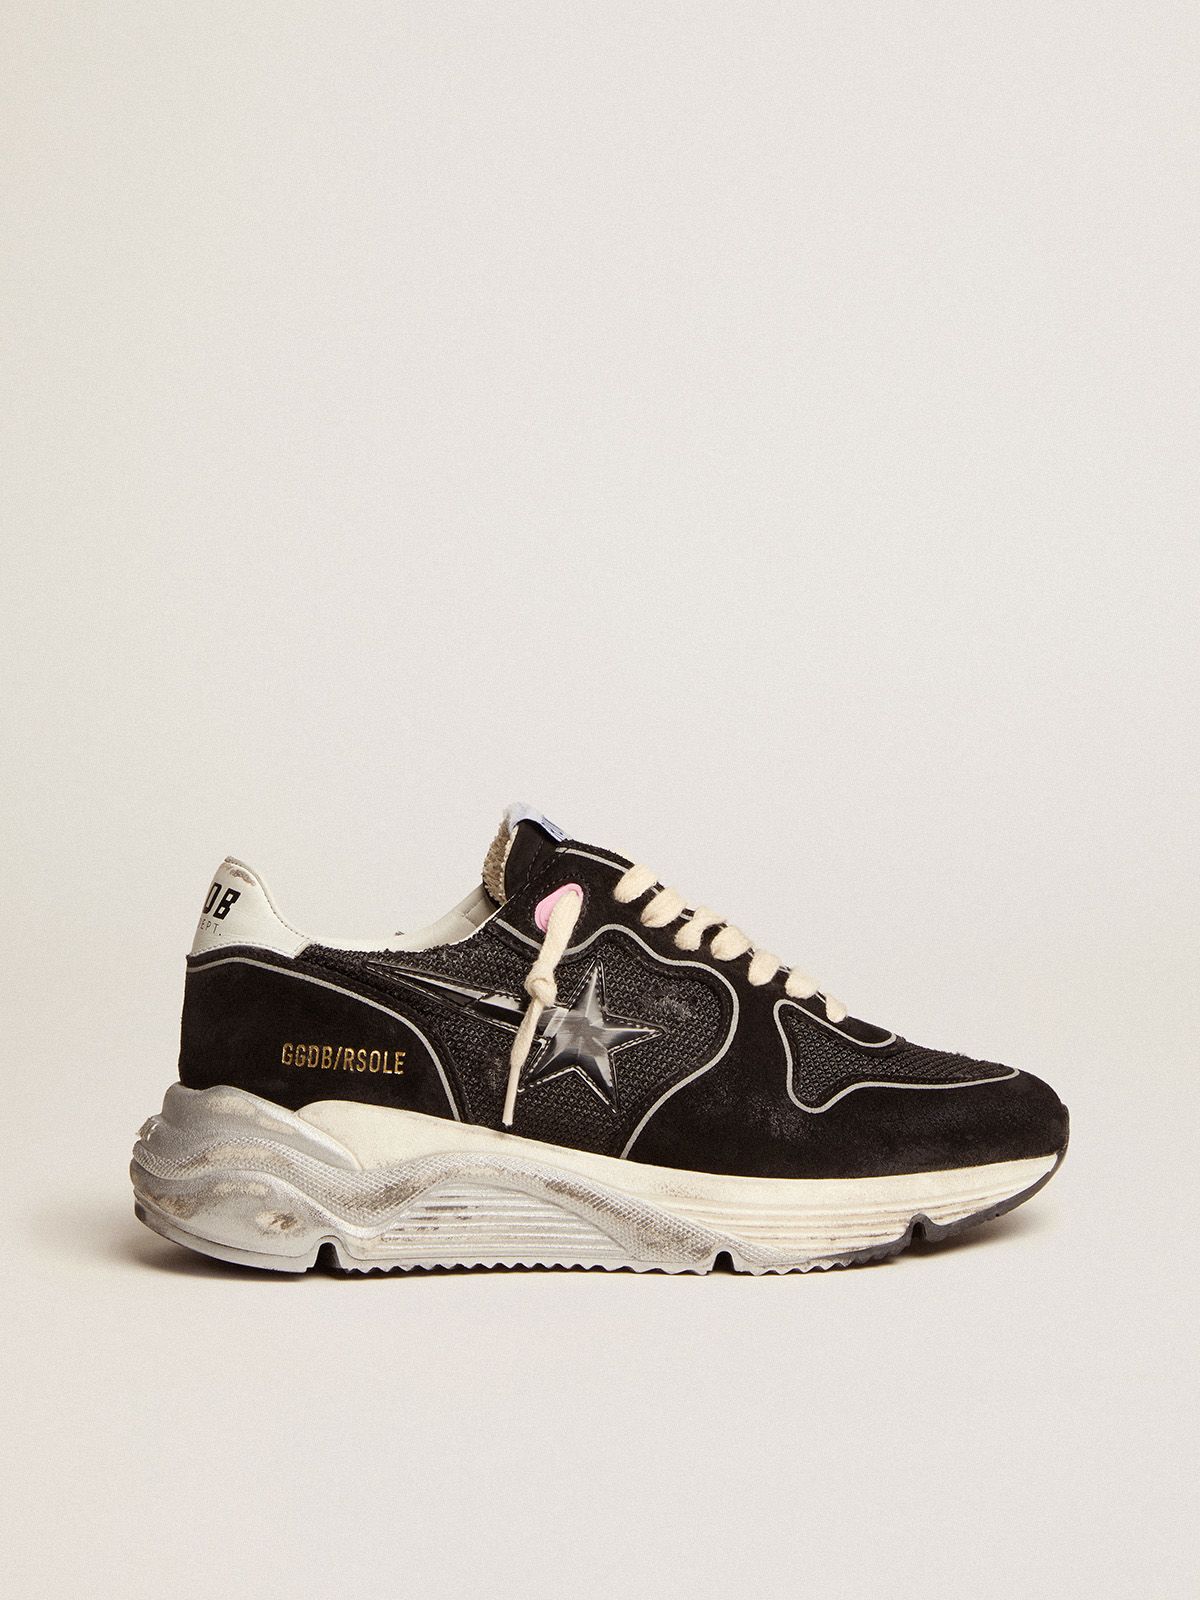 golden goose 3D upper star black Running with Sole mesh sneakers and suede